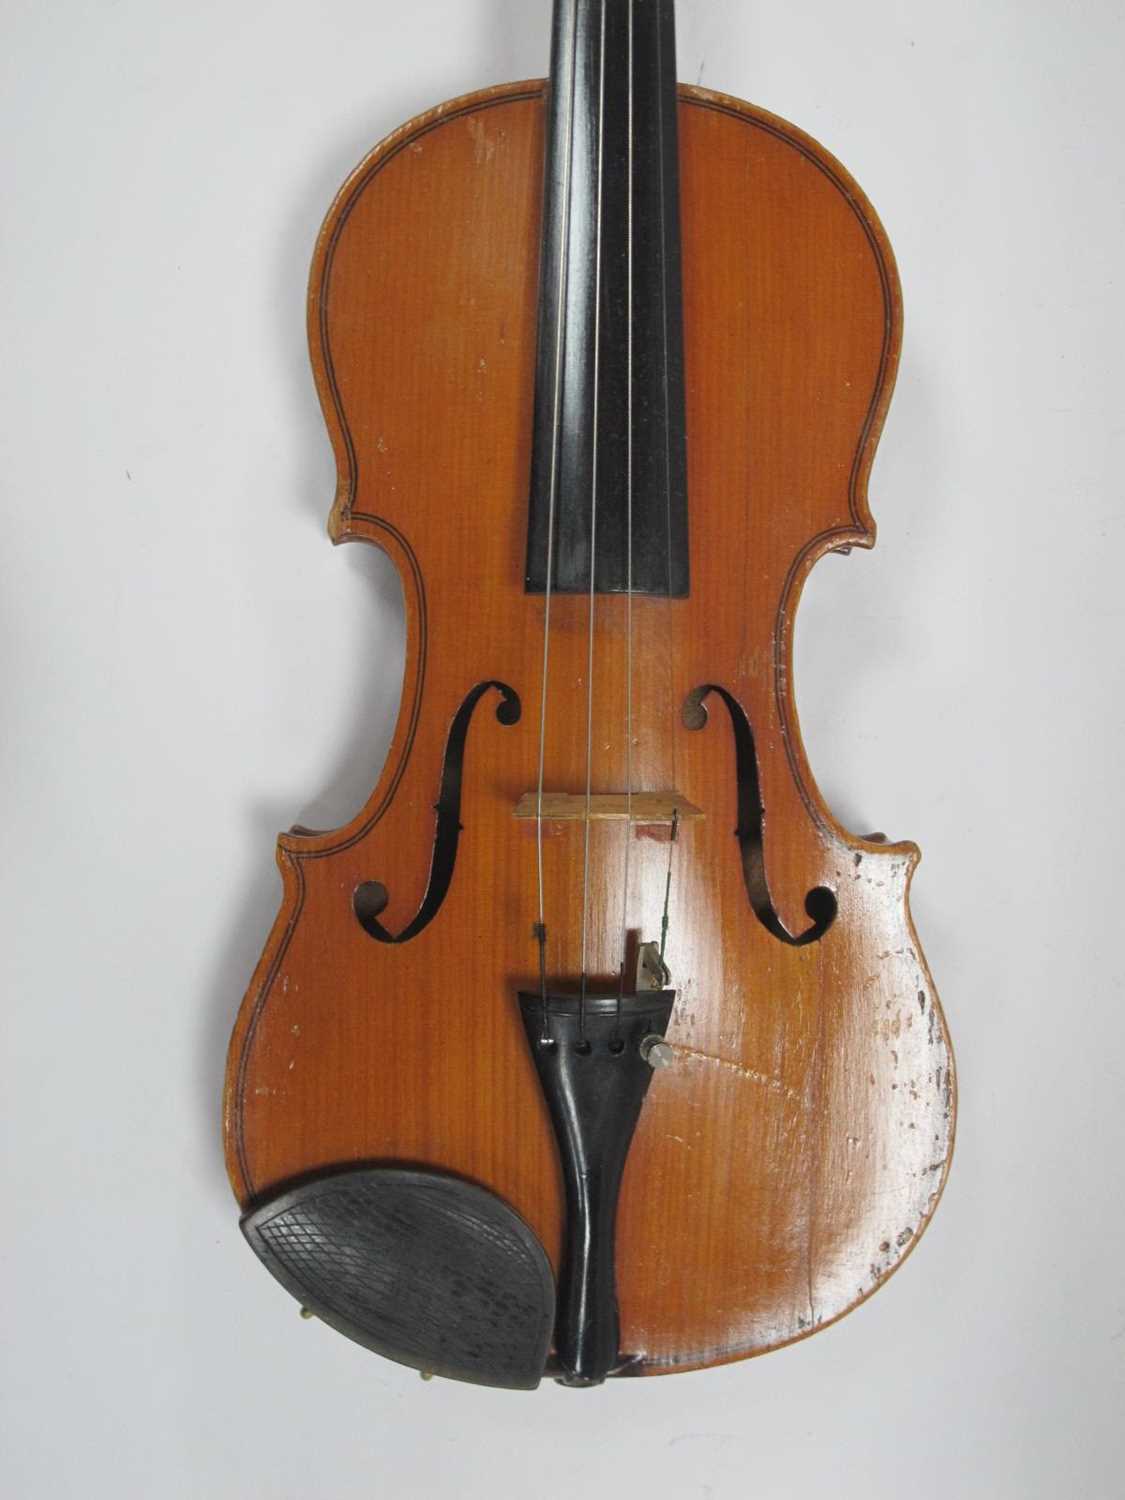 Violin, with two piece back, overall length 51.5cm, length of back 31cm, with bow and case. - Image 3 of 18